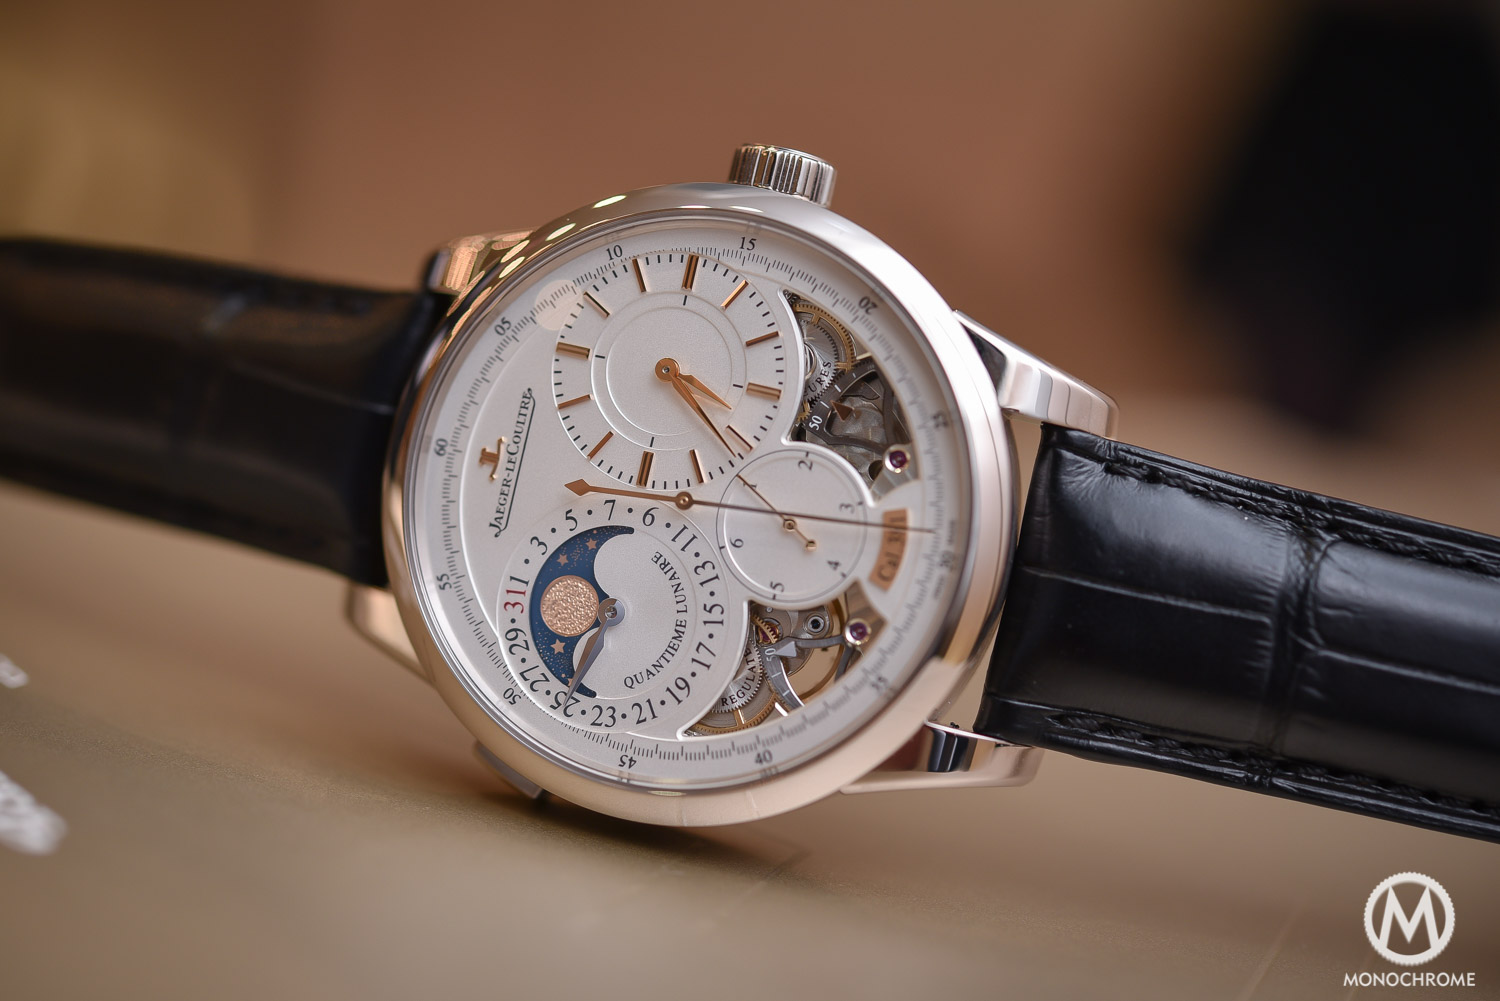 Jaeger-LeCoultre Duometre Quantieme Lunaire in white gold and opened dial - 2